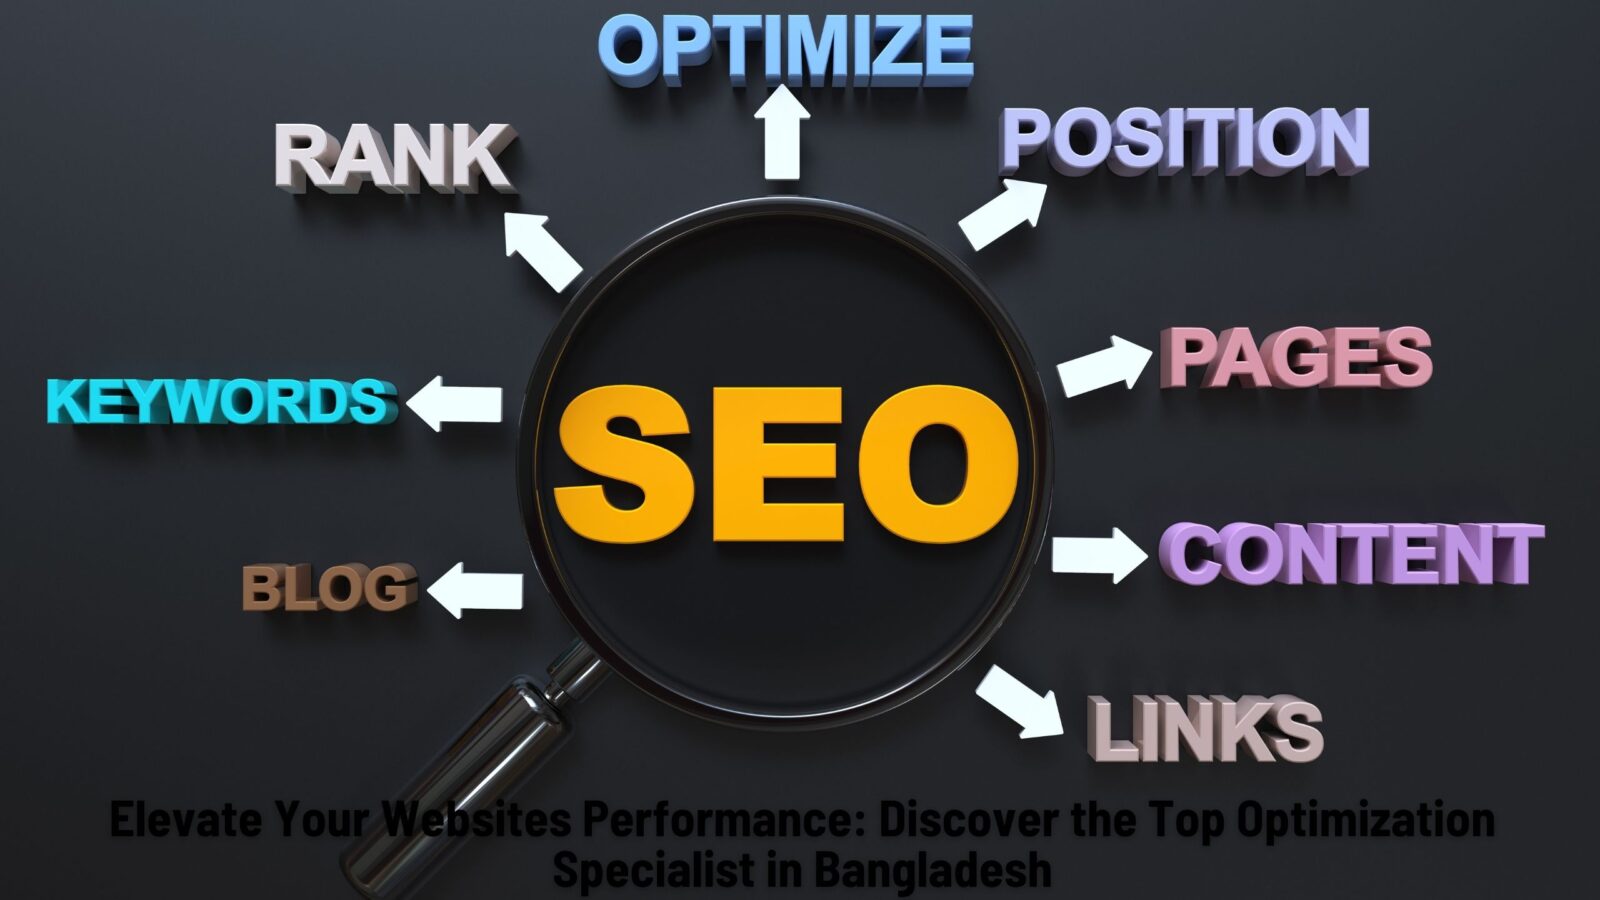 Elevate Your Websites Performance: Discover the Top Optimization Specialist in Bangladesh